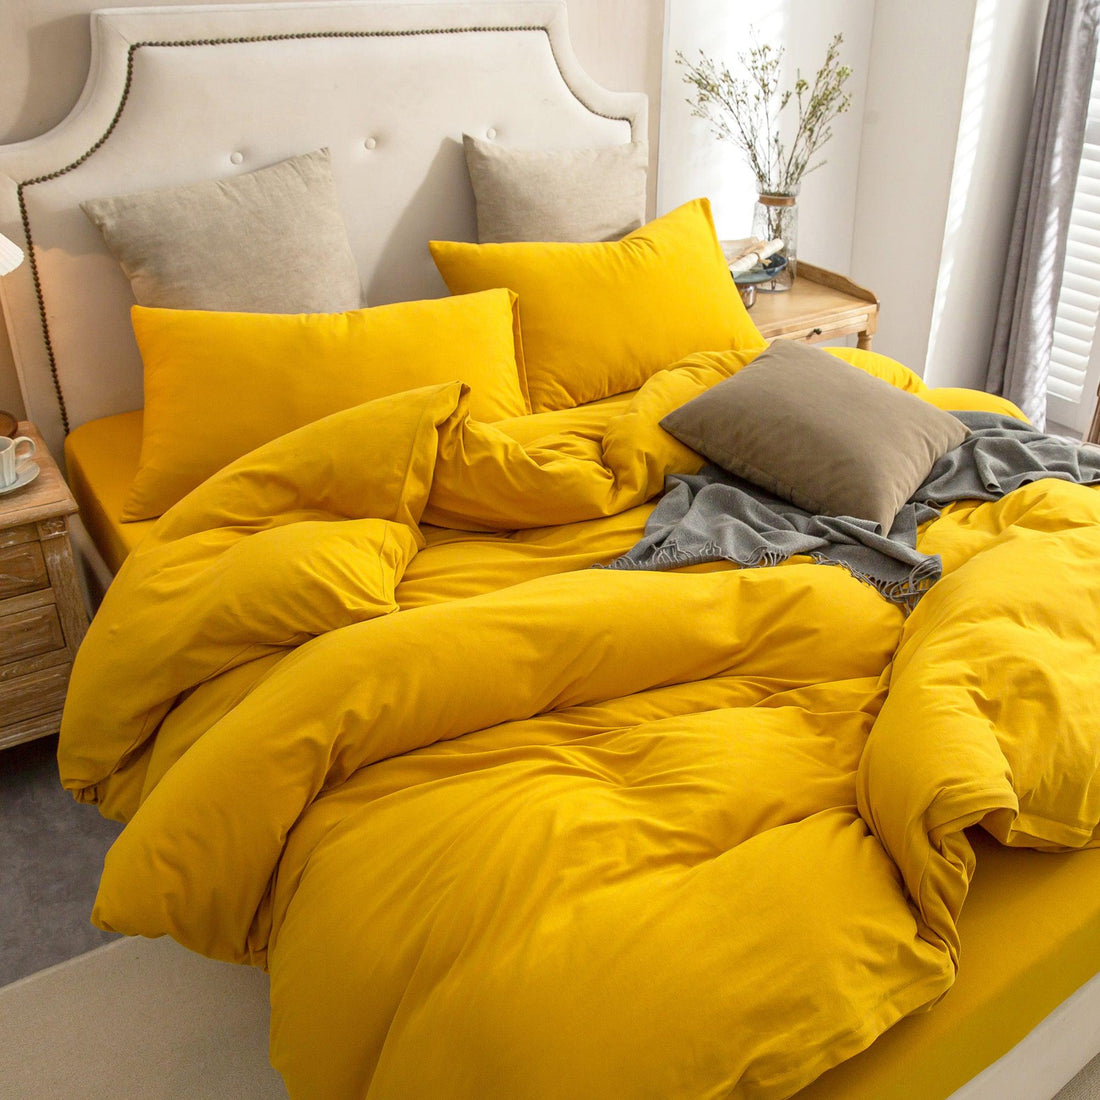 Pure Era - Jersey Duvet Cover Set - Solid Yellow